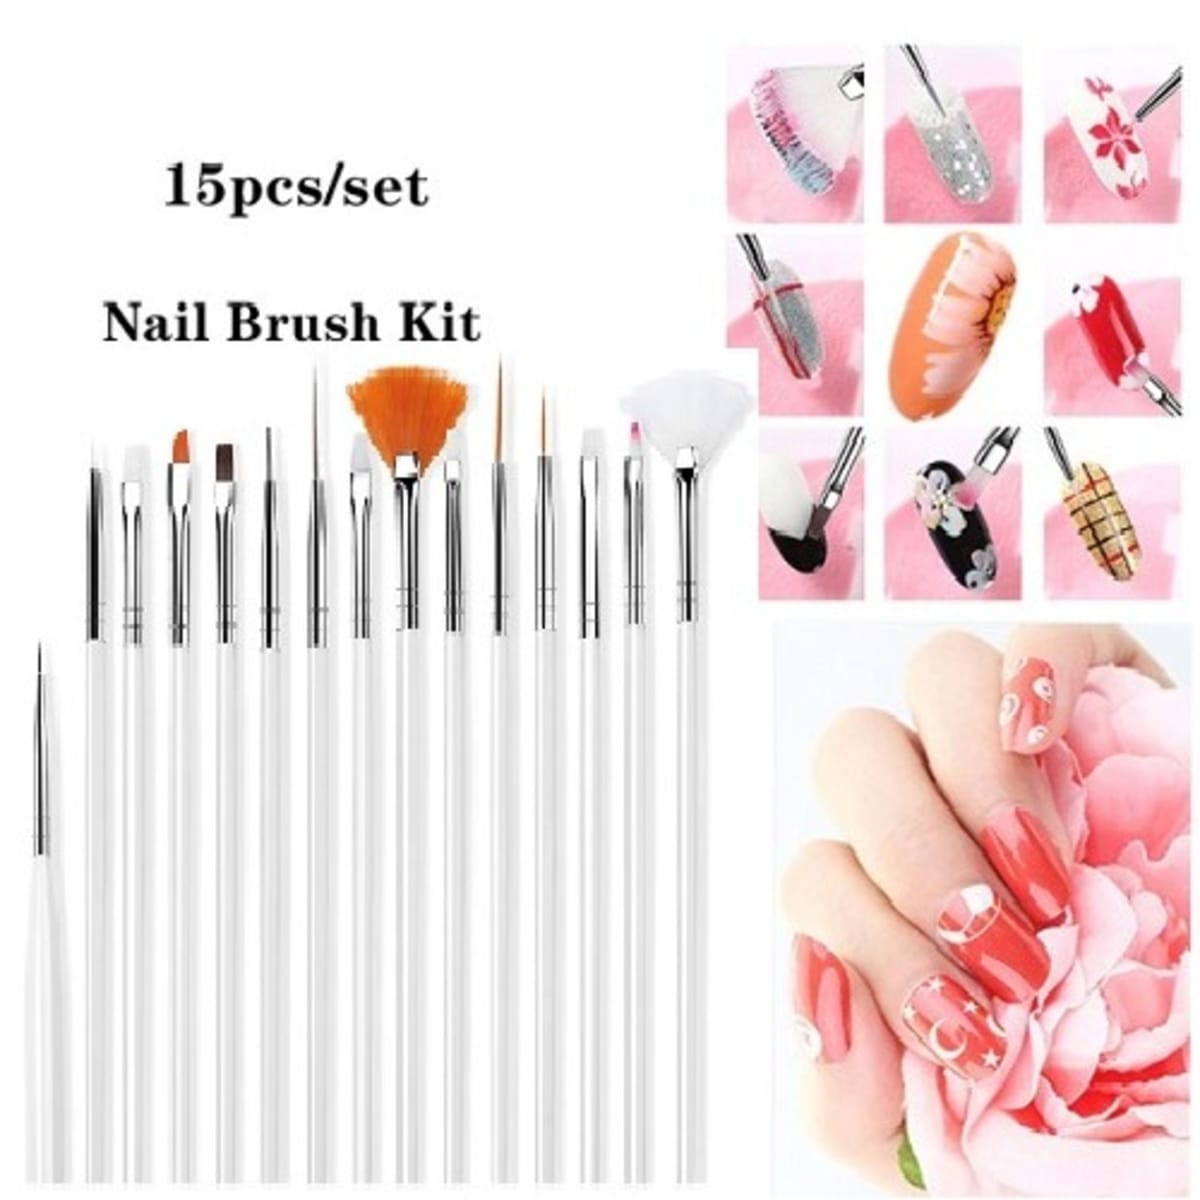 Professional Nail Art Brushes Set for Precise and Detailed Designs